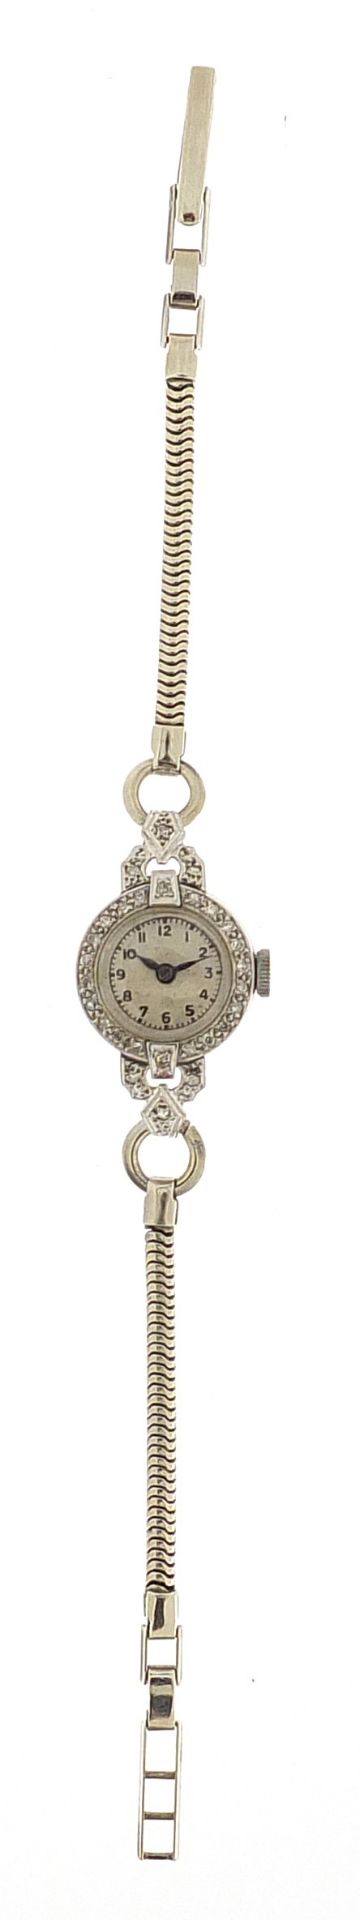 Art Deco ladies 18ct white gold and platinum diamond cocktail watch with white metal strap, 17mm - Image 2 of 8